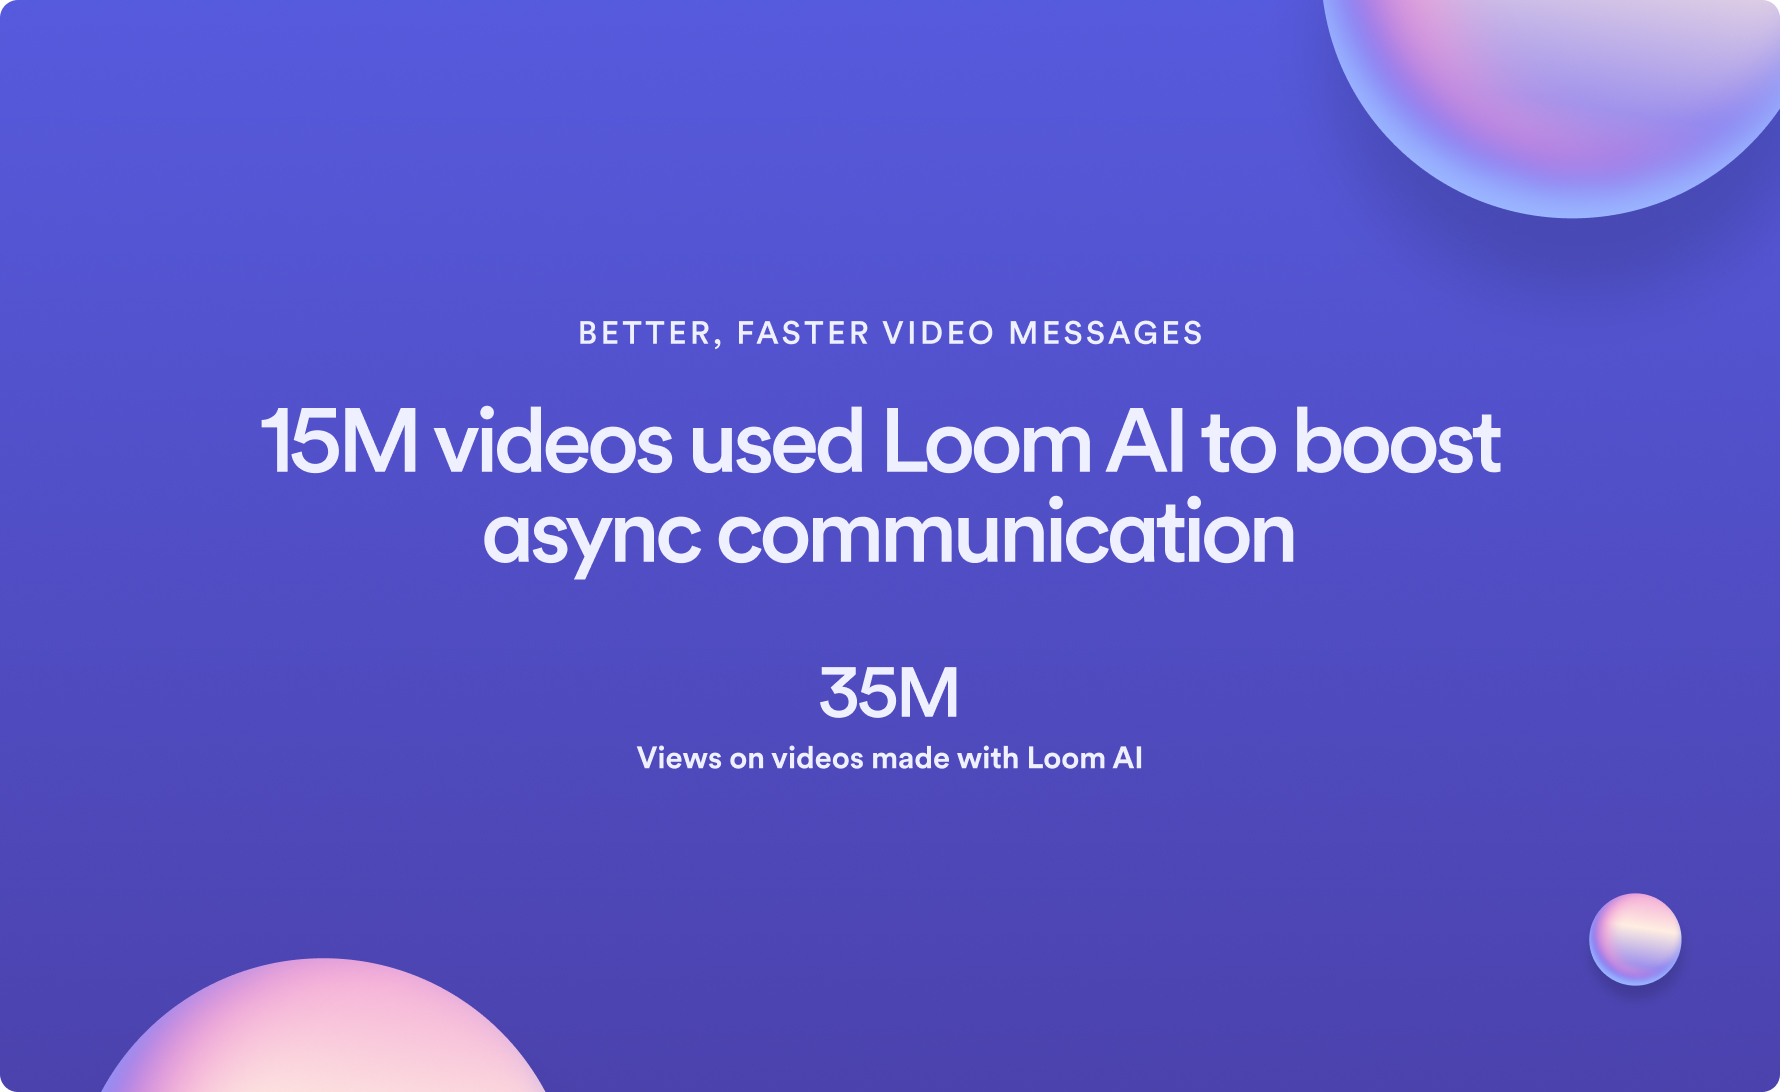 Better, Faster Video Messages with Loom AI